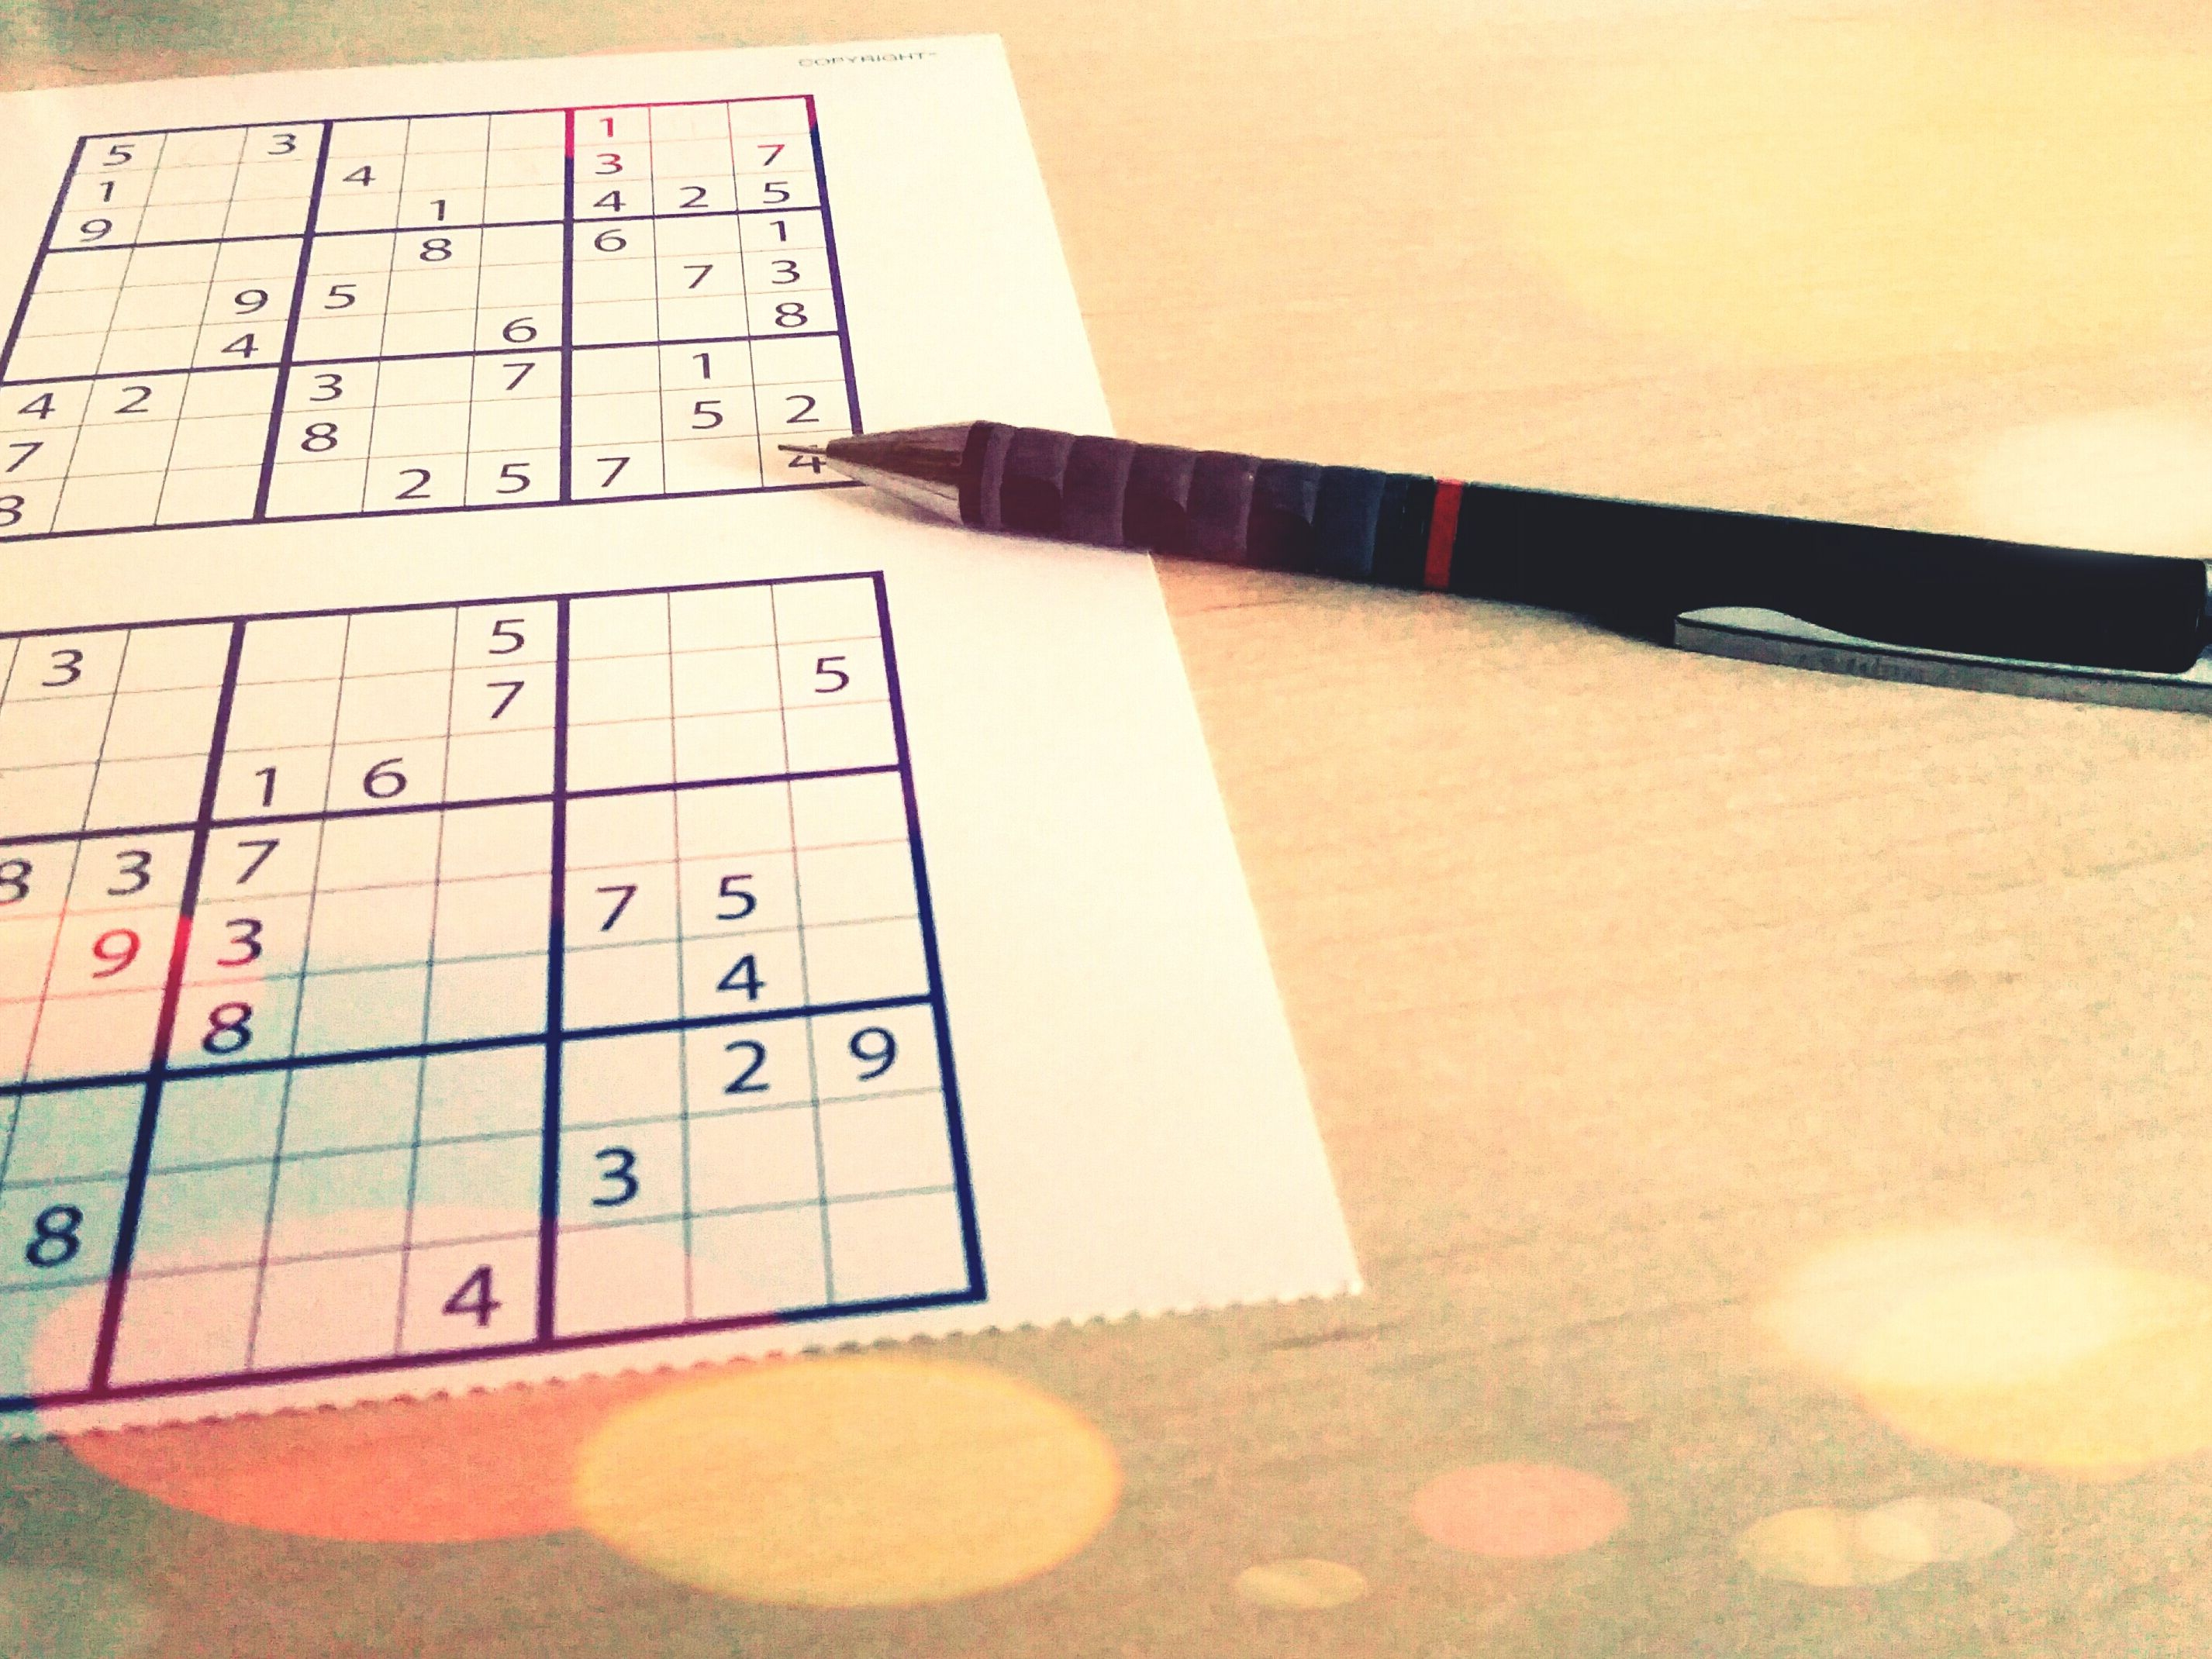 Free Printable Sudoku Puzzles For All Abilities - Free Printable Super Challenger Sudoku